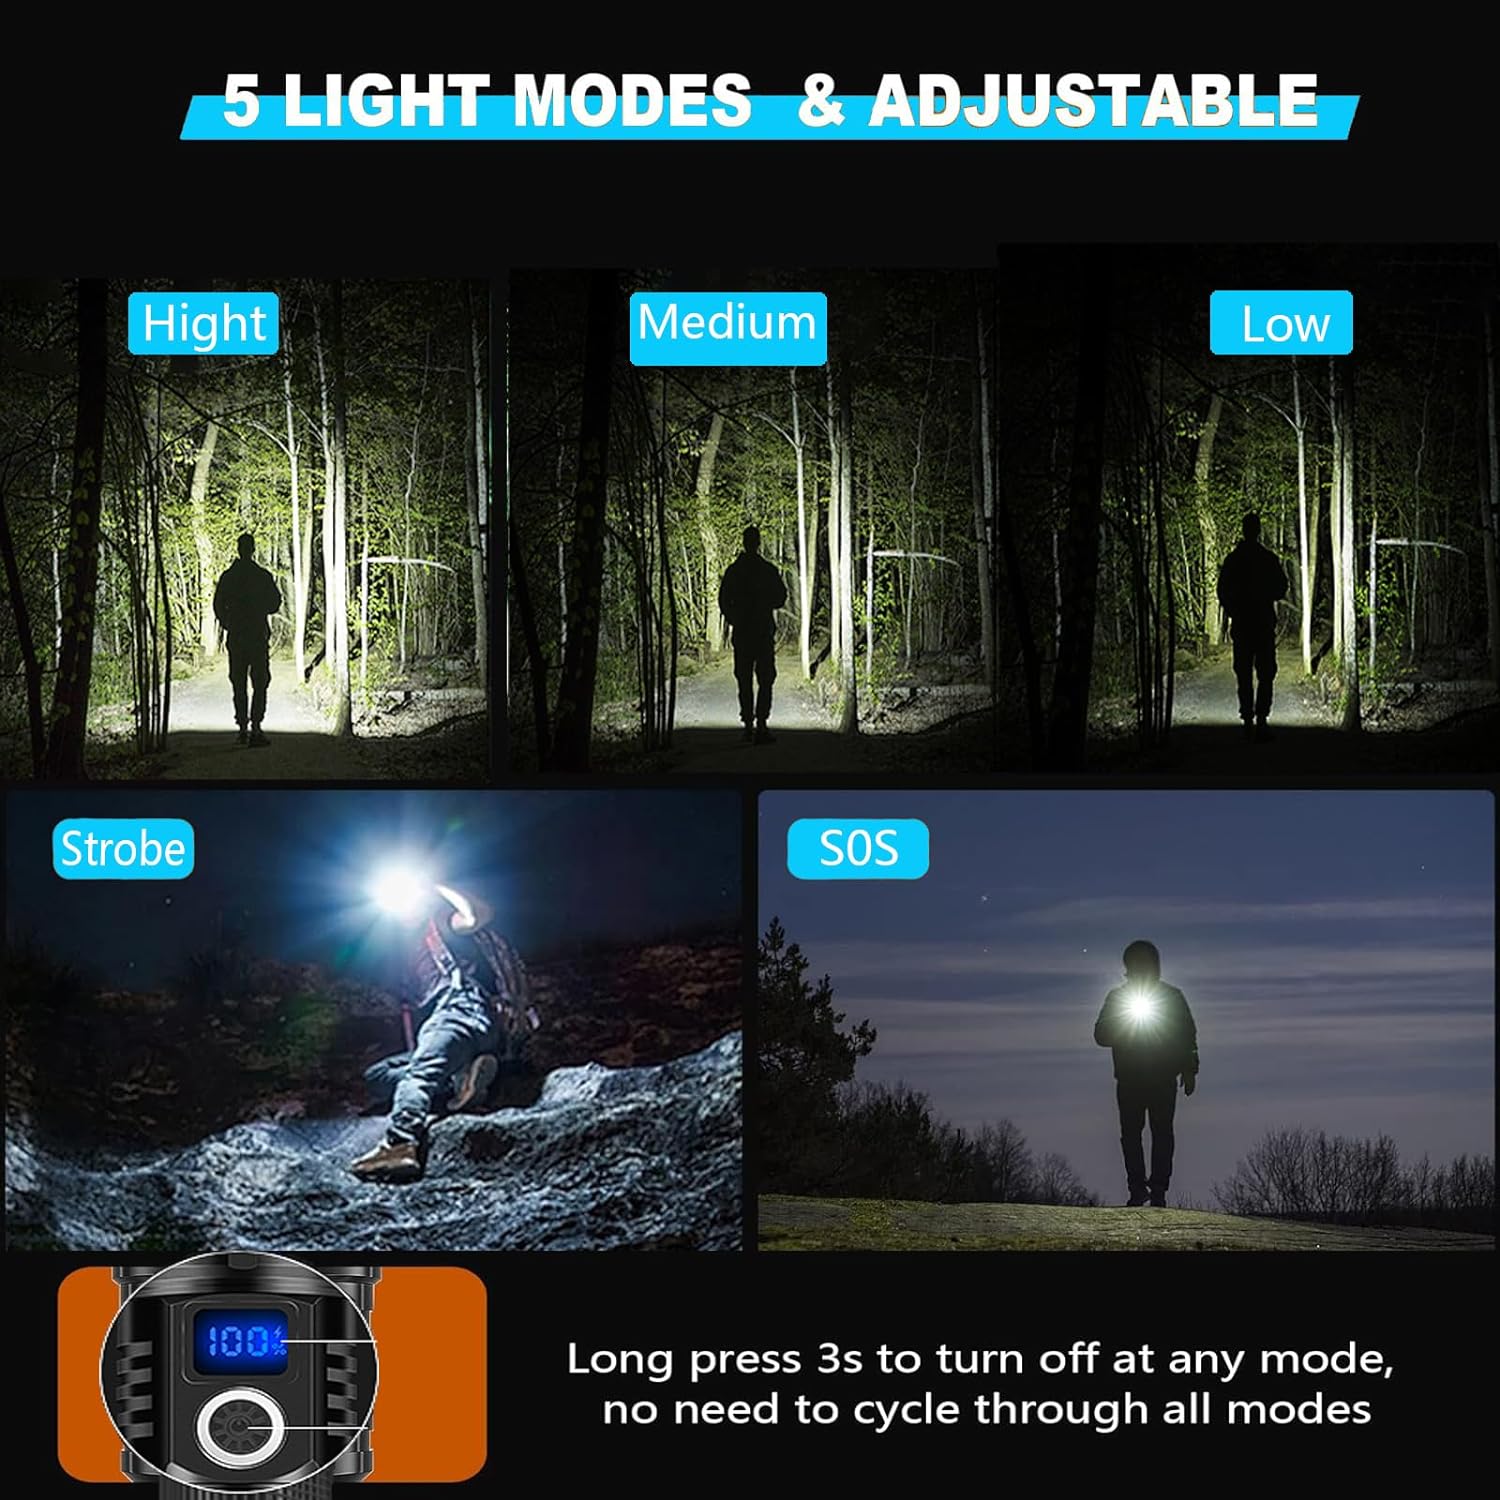 LUXJUMPER LED Flashlights High Lumens Rechargeable, 200000 Lumens XHP70 Tactical Flashlight, Super Bright 5 Modes Zoomable Waterproof Powerful Handheld Flashlights for Camping Emergency Dog Walking